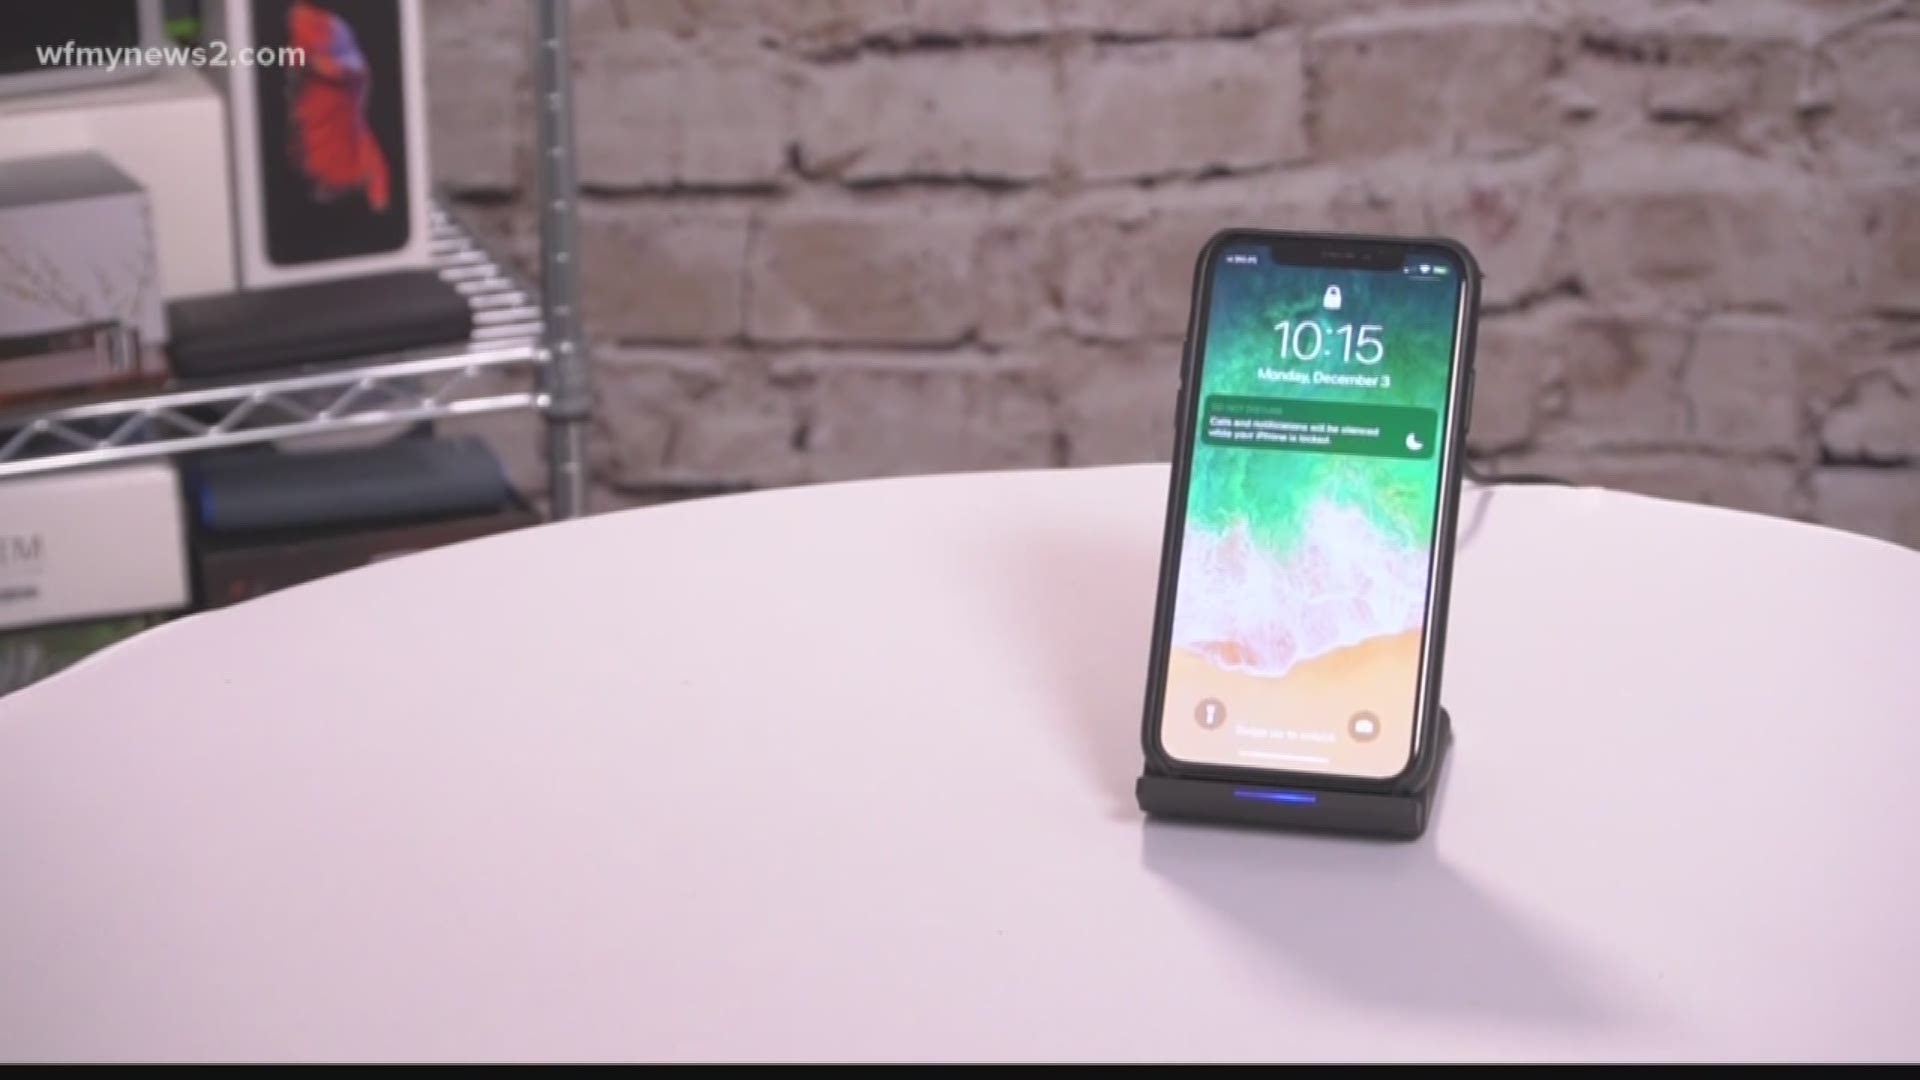 Wireless charging continues to dominate at the consumer electronics show this year.  Our deal boss Matt Granite shows us how to cut the cord Vegas-style.